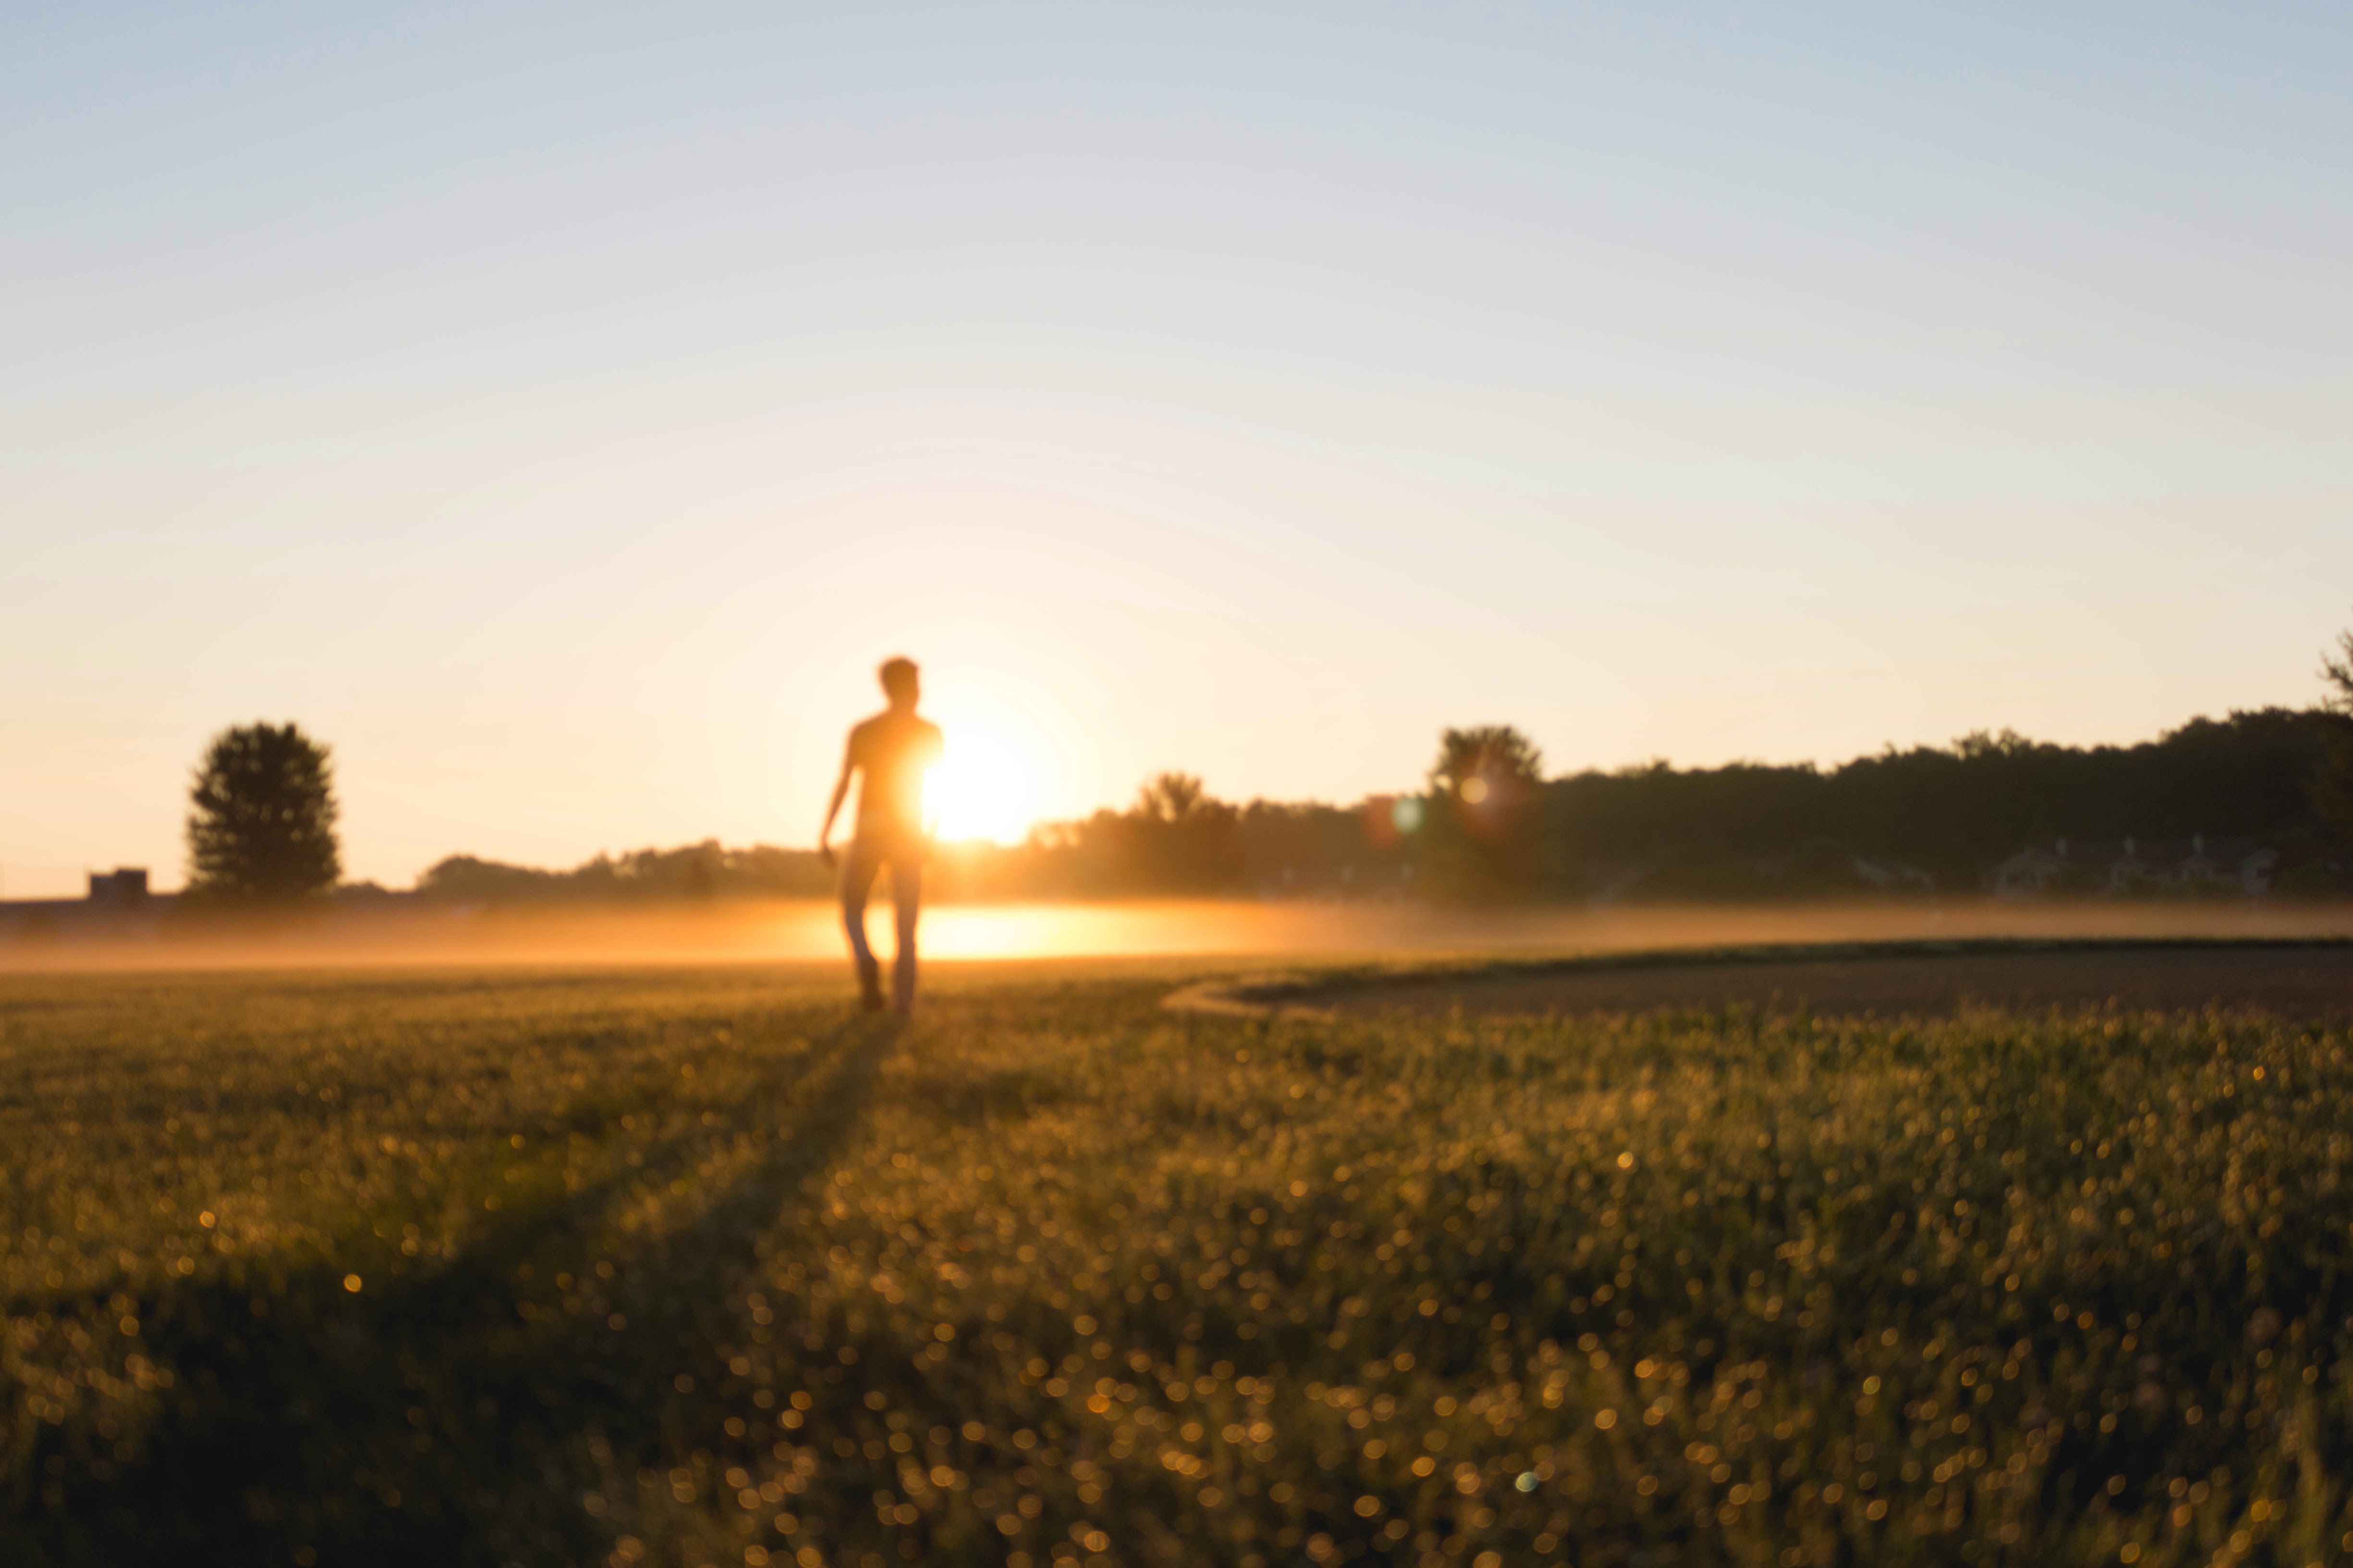 Sunrise Photo of a Person on a Field